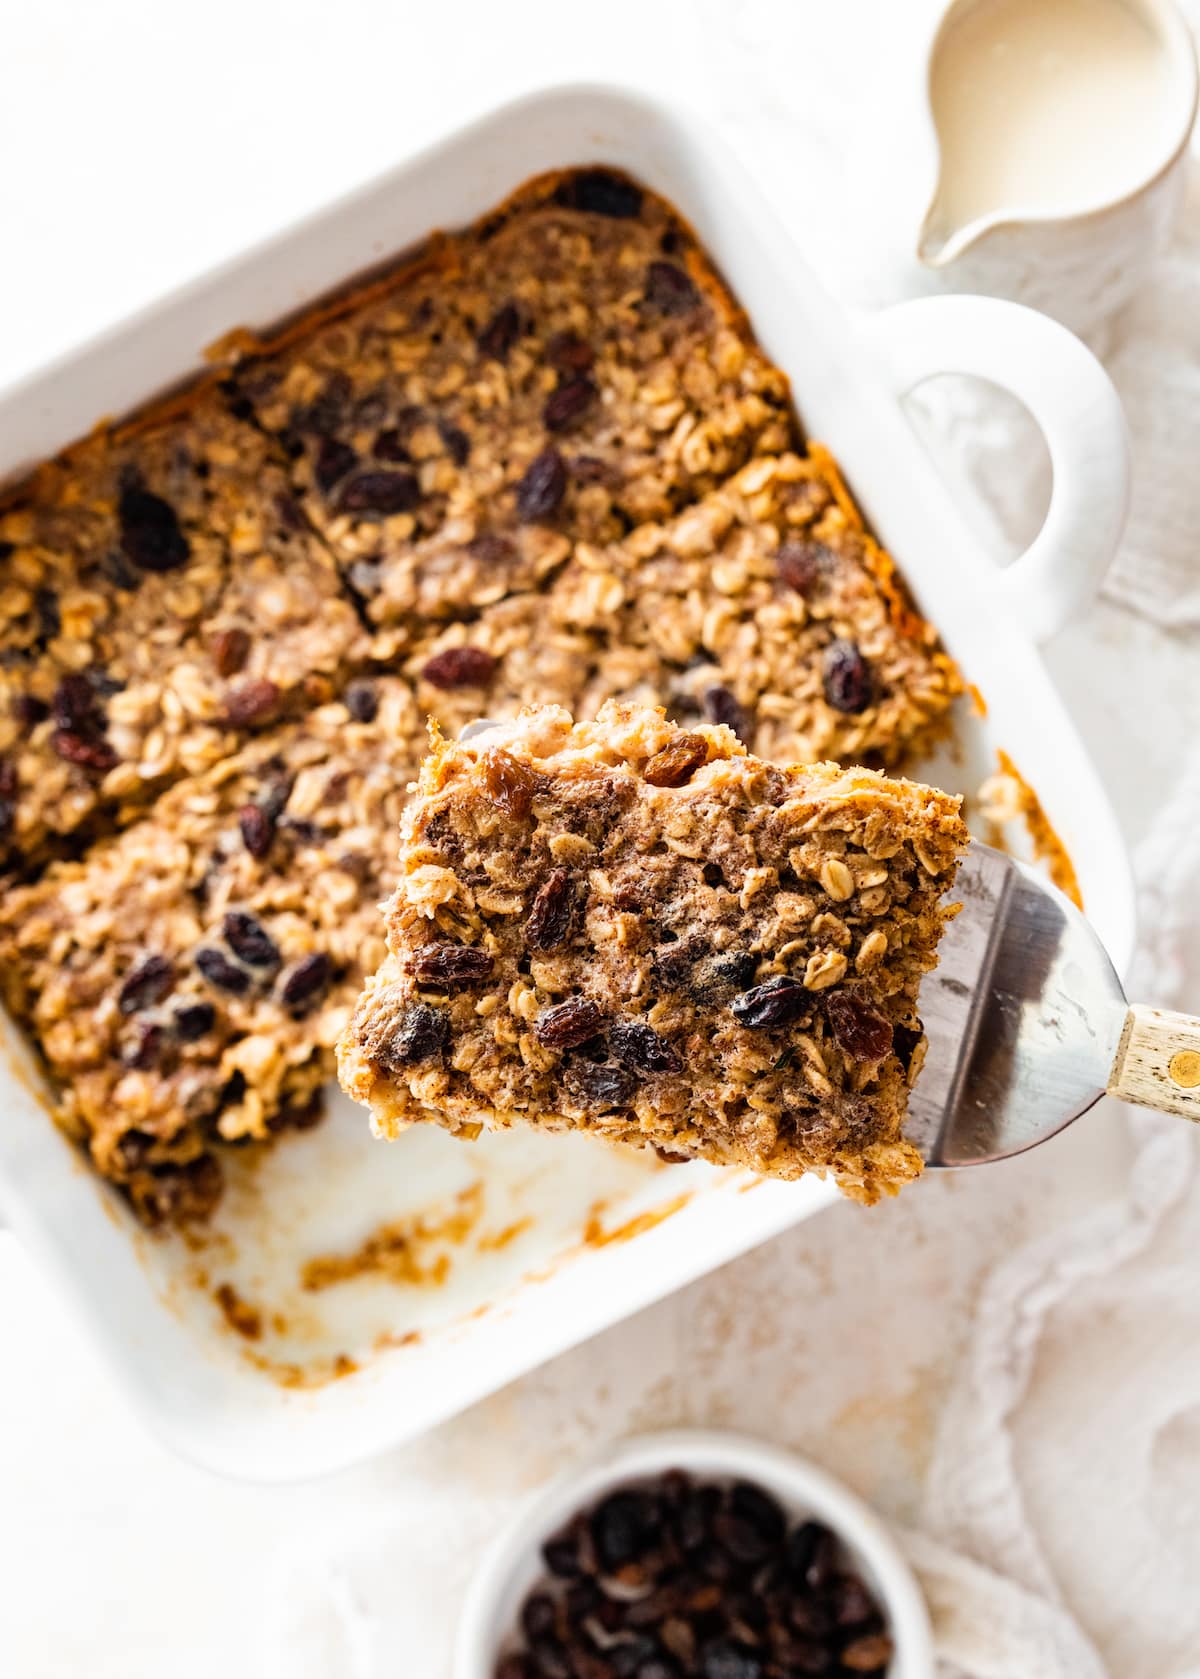 A metal spatula holding a serving of the cinnamon raisin baked oatmeal over a square baking dish with the rest of the baked oatmeal.